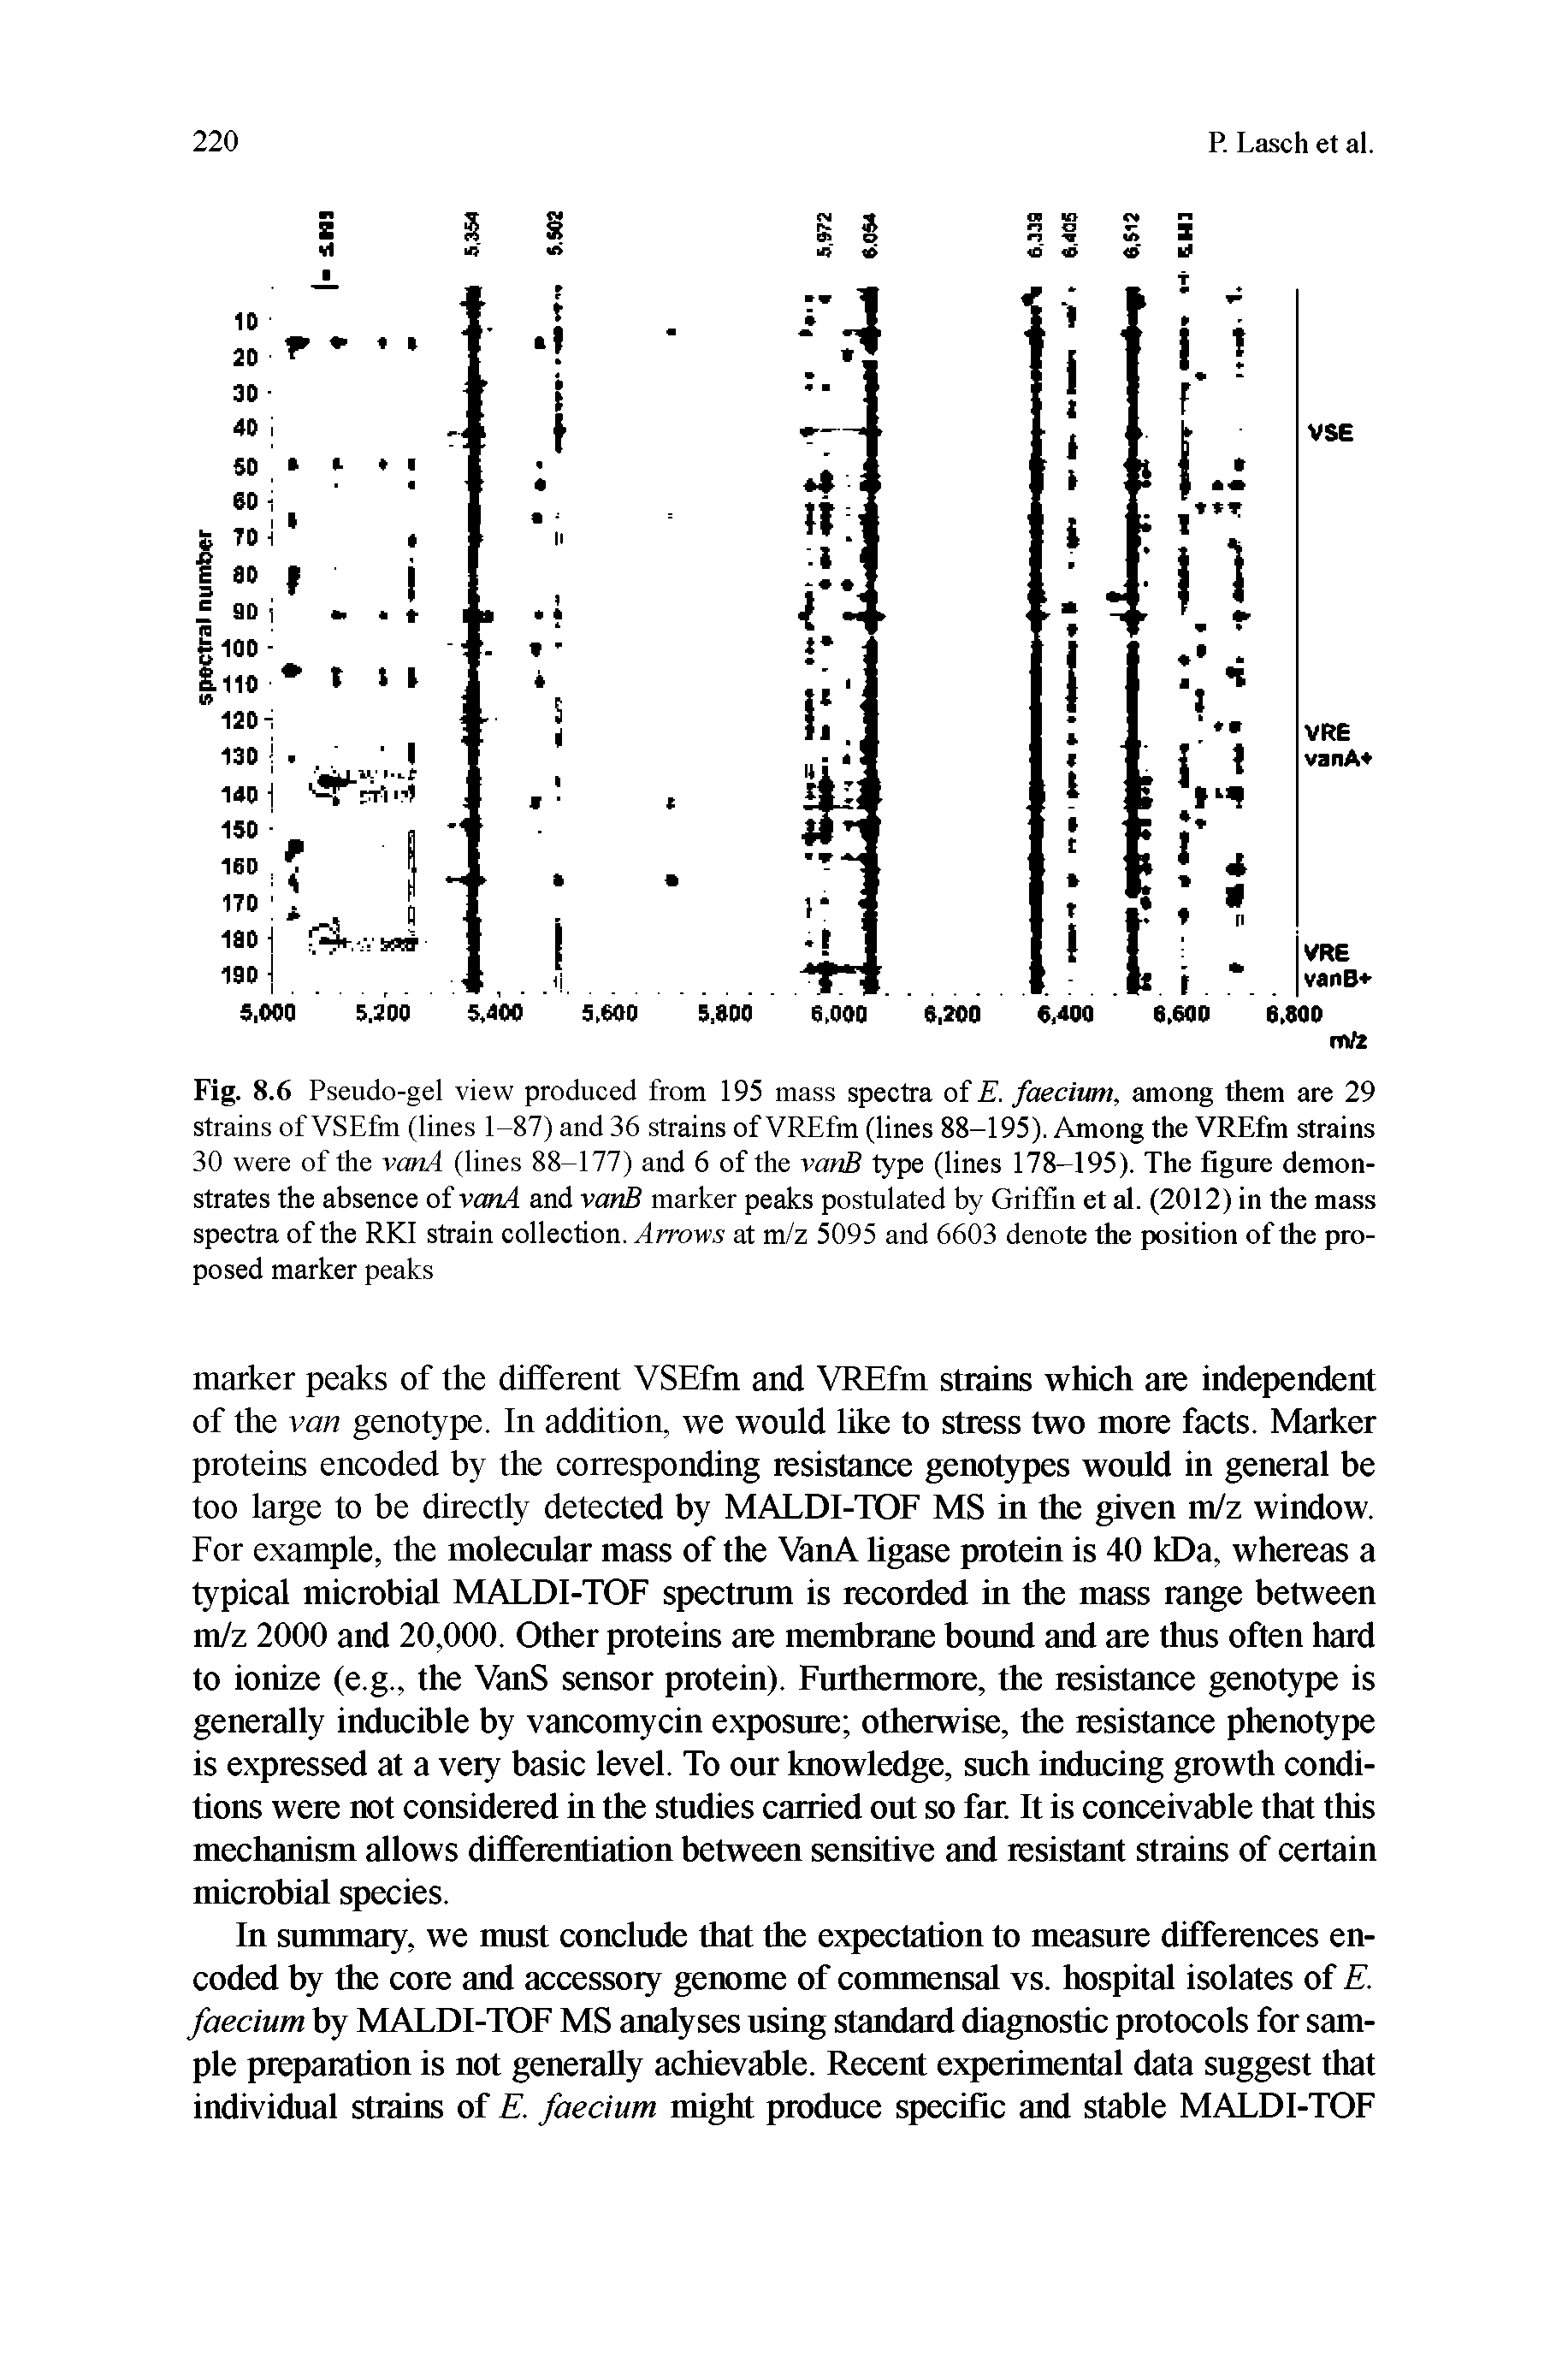 Fig. 8.6 Pseudo-gel view produced from 195 mass spectra of . faecium, among them are 29 strains of VSEfm (lines 1-87) and 36 strains of VREfm (lines 88-195). Among the VREfm strains 30 were of the vaw.4 (lines 88-177) and 6 of the vanB type (lines 178-195). The figure demonstrates the absence of vanA and variB marker peaks postulated by Griffin et al. (2012) in the mass spectra of the RKI strain collection. Arrows at m/z 5095 and 6603 denote the position of the proposed marker peaks...